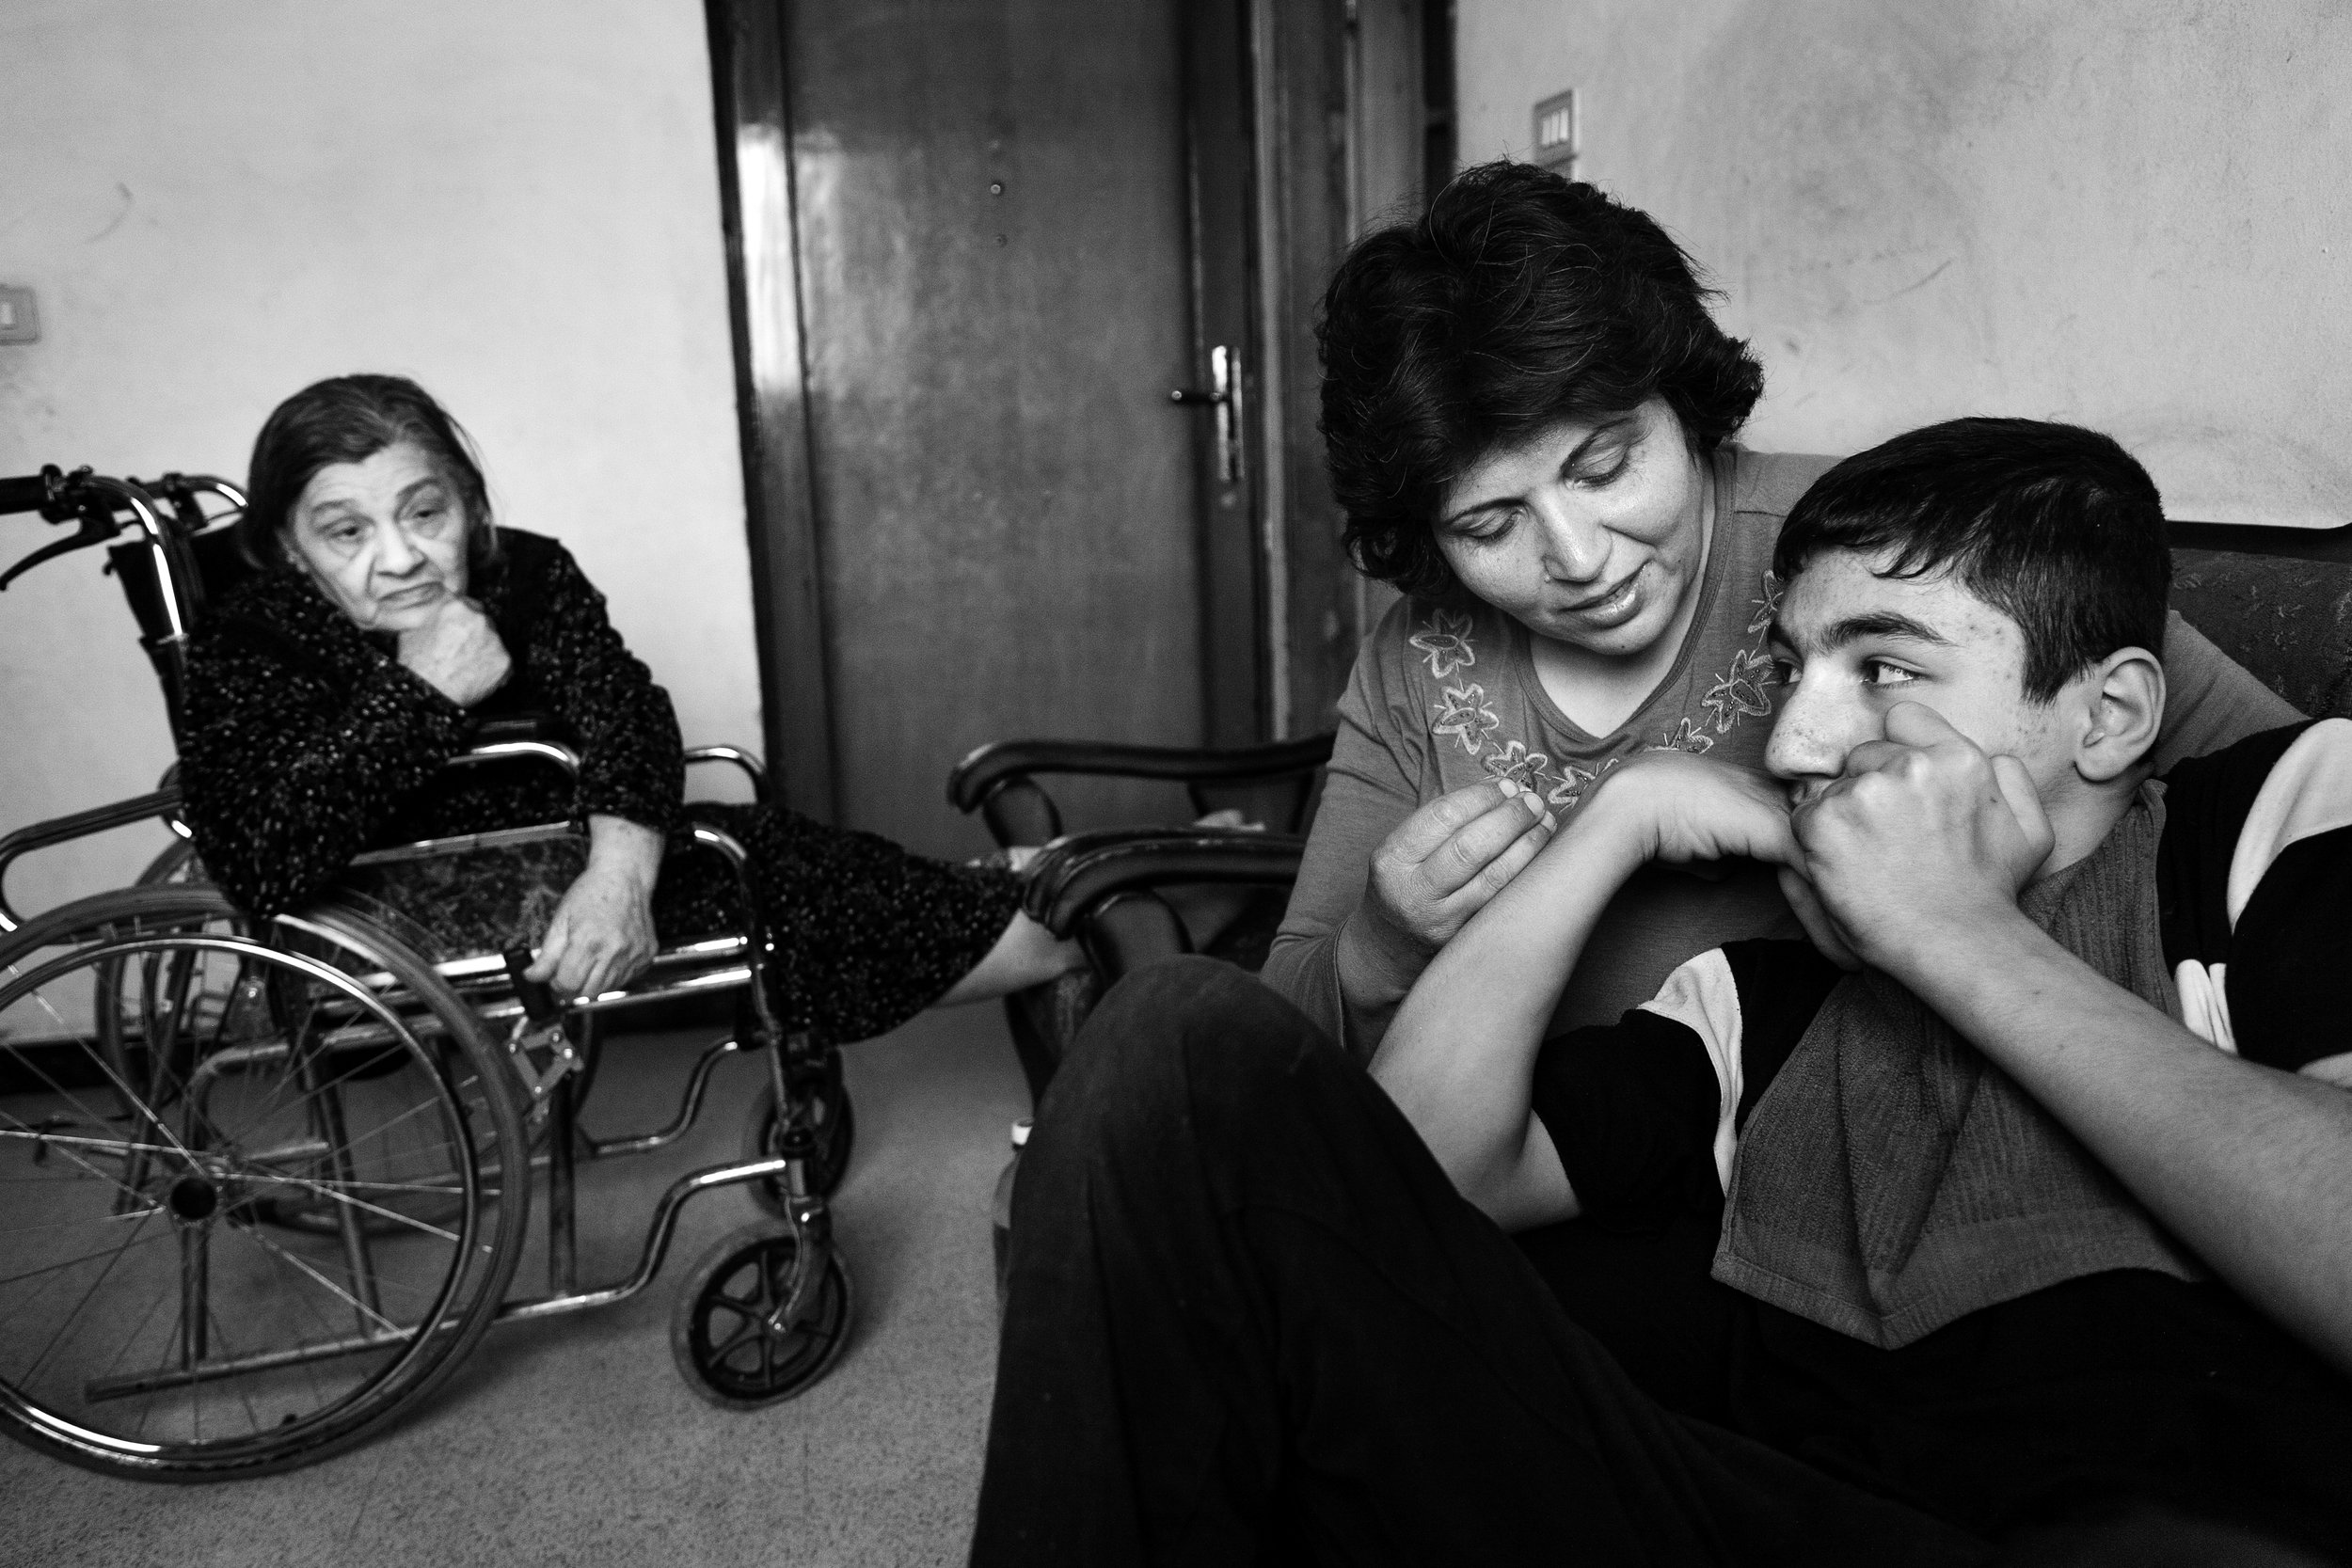  Sabah Said Rafo, her disabled son, Nour, and her wheelchair-bound mother converse in their newly-established home in Damascus, Syria in 2008. The family fled a turbulent life of violence, sectarian threats, and kidnapping in Iraq. 